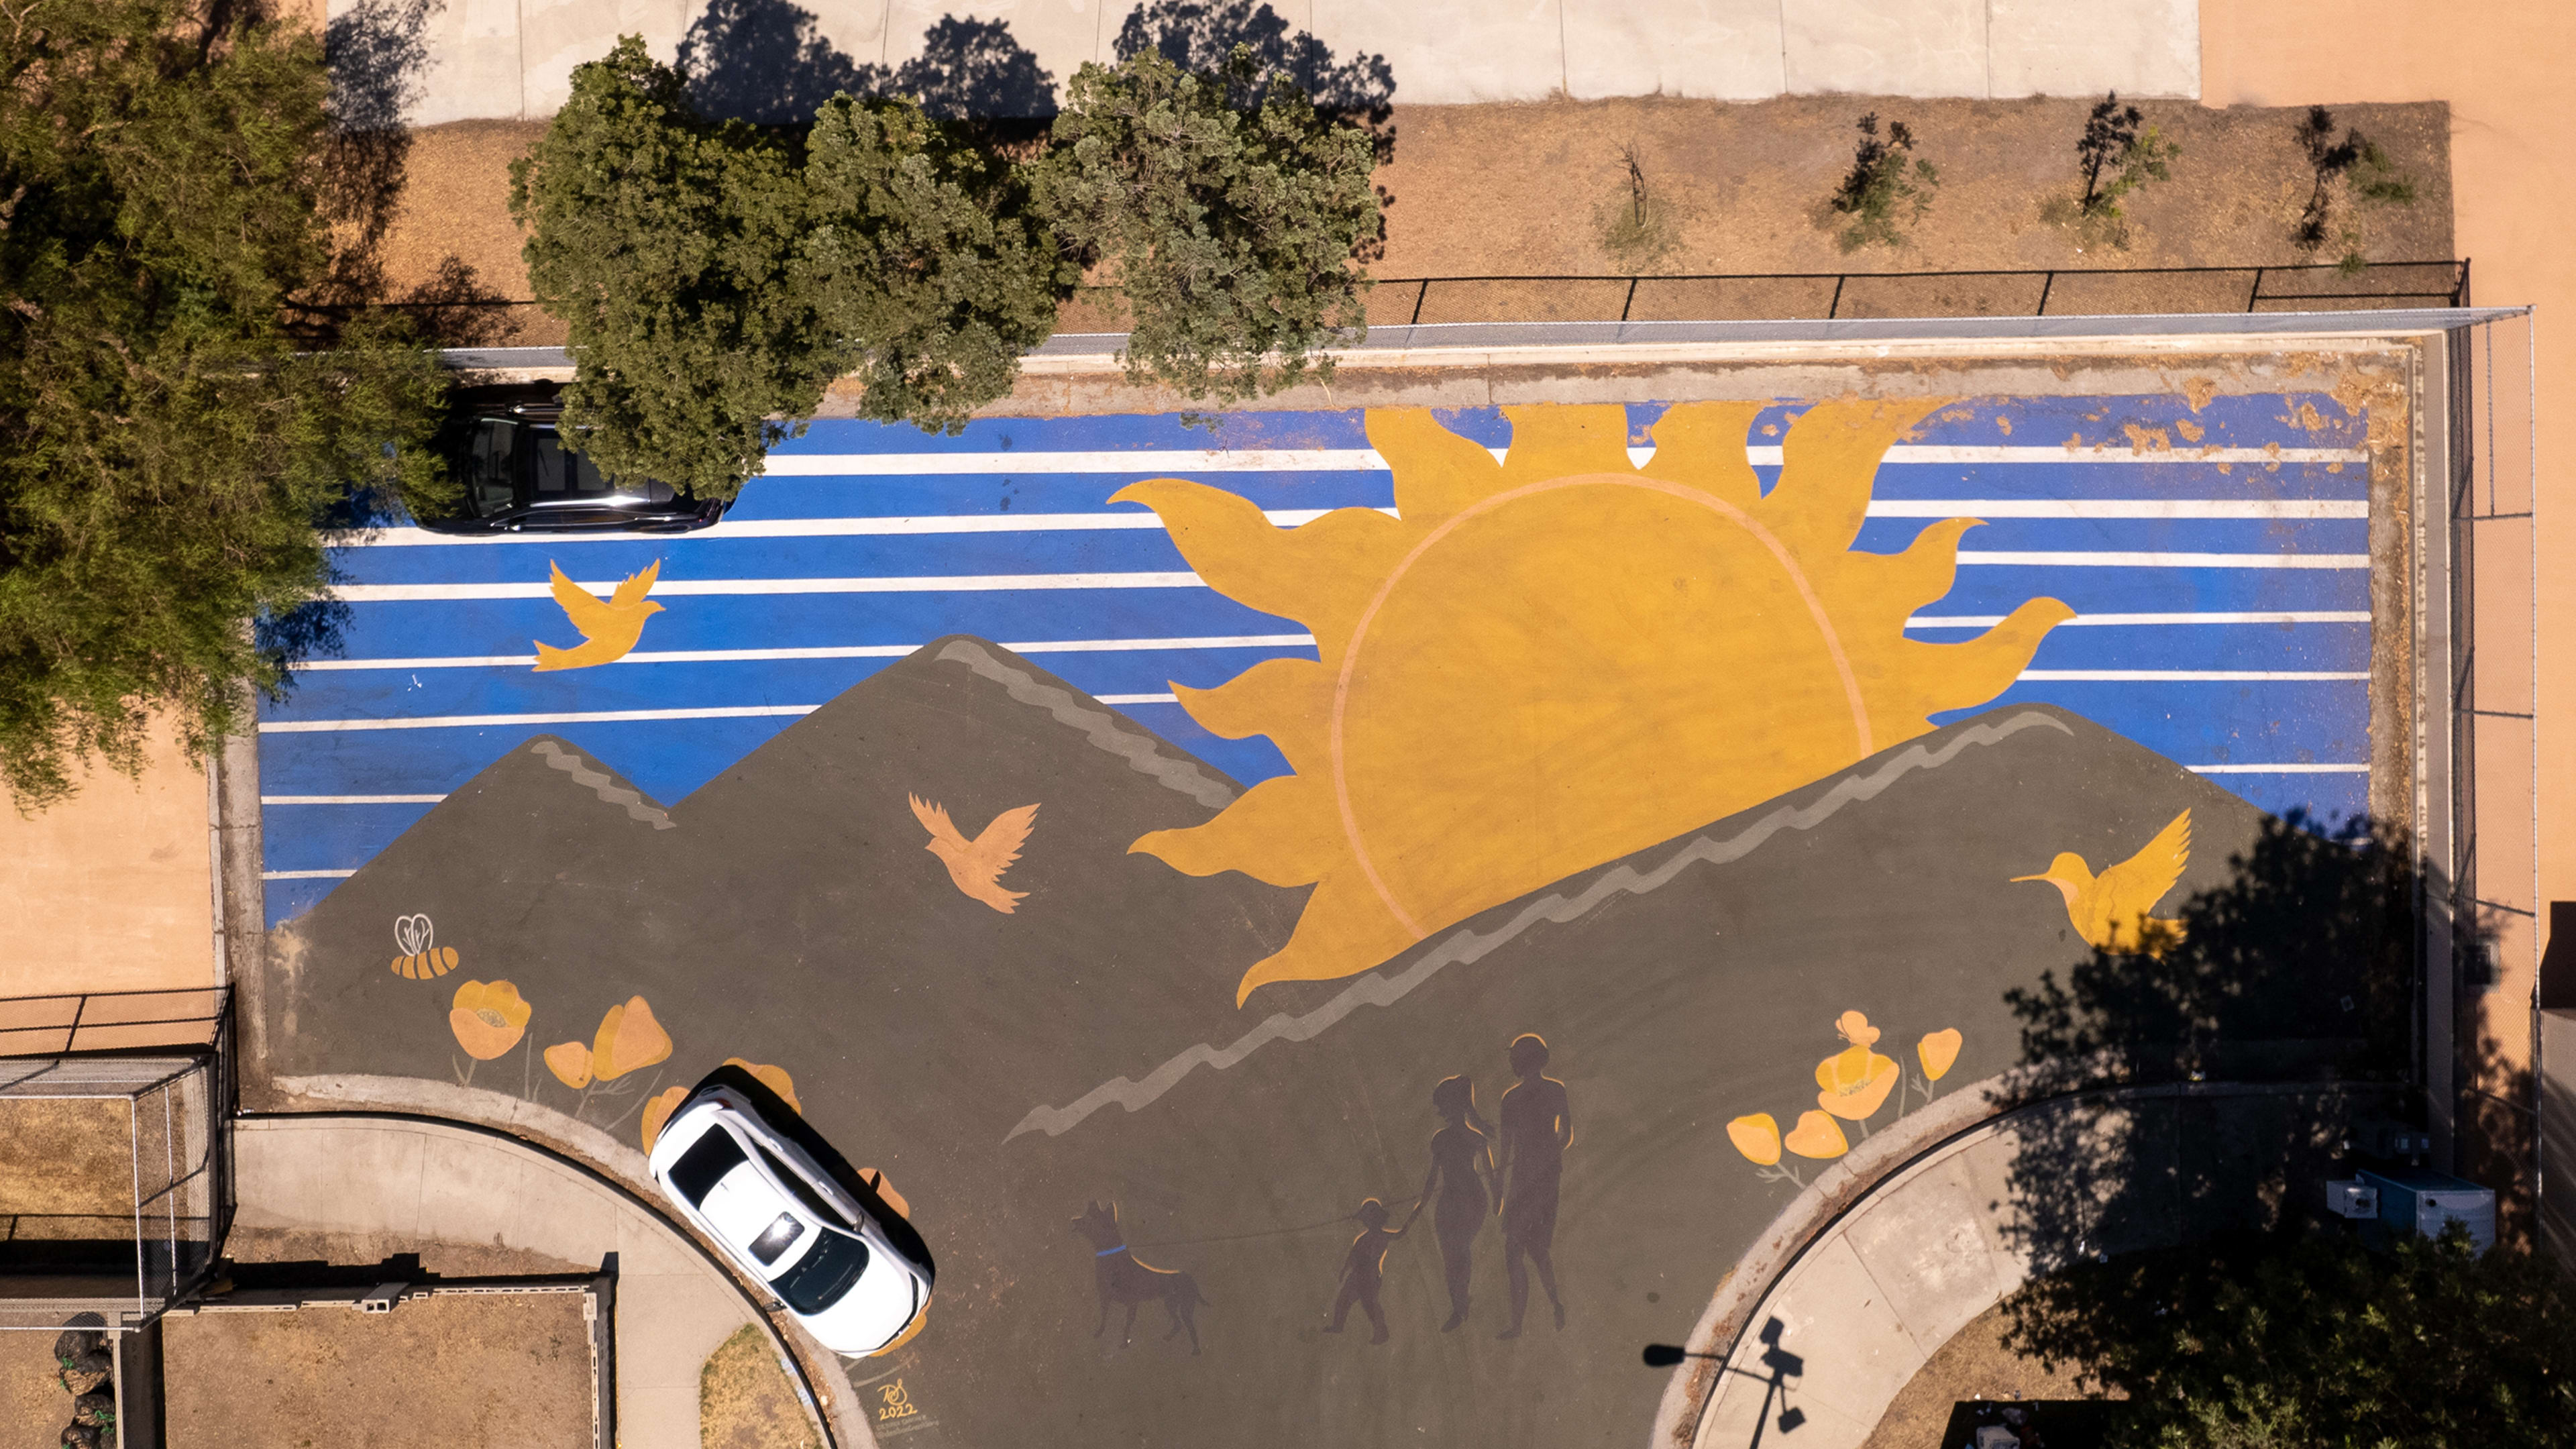 Something amazing happened when an L.A. neighborhood covered its roads in solar reflective paint